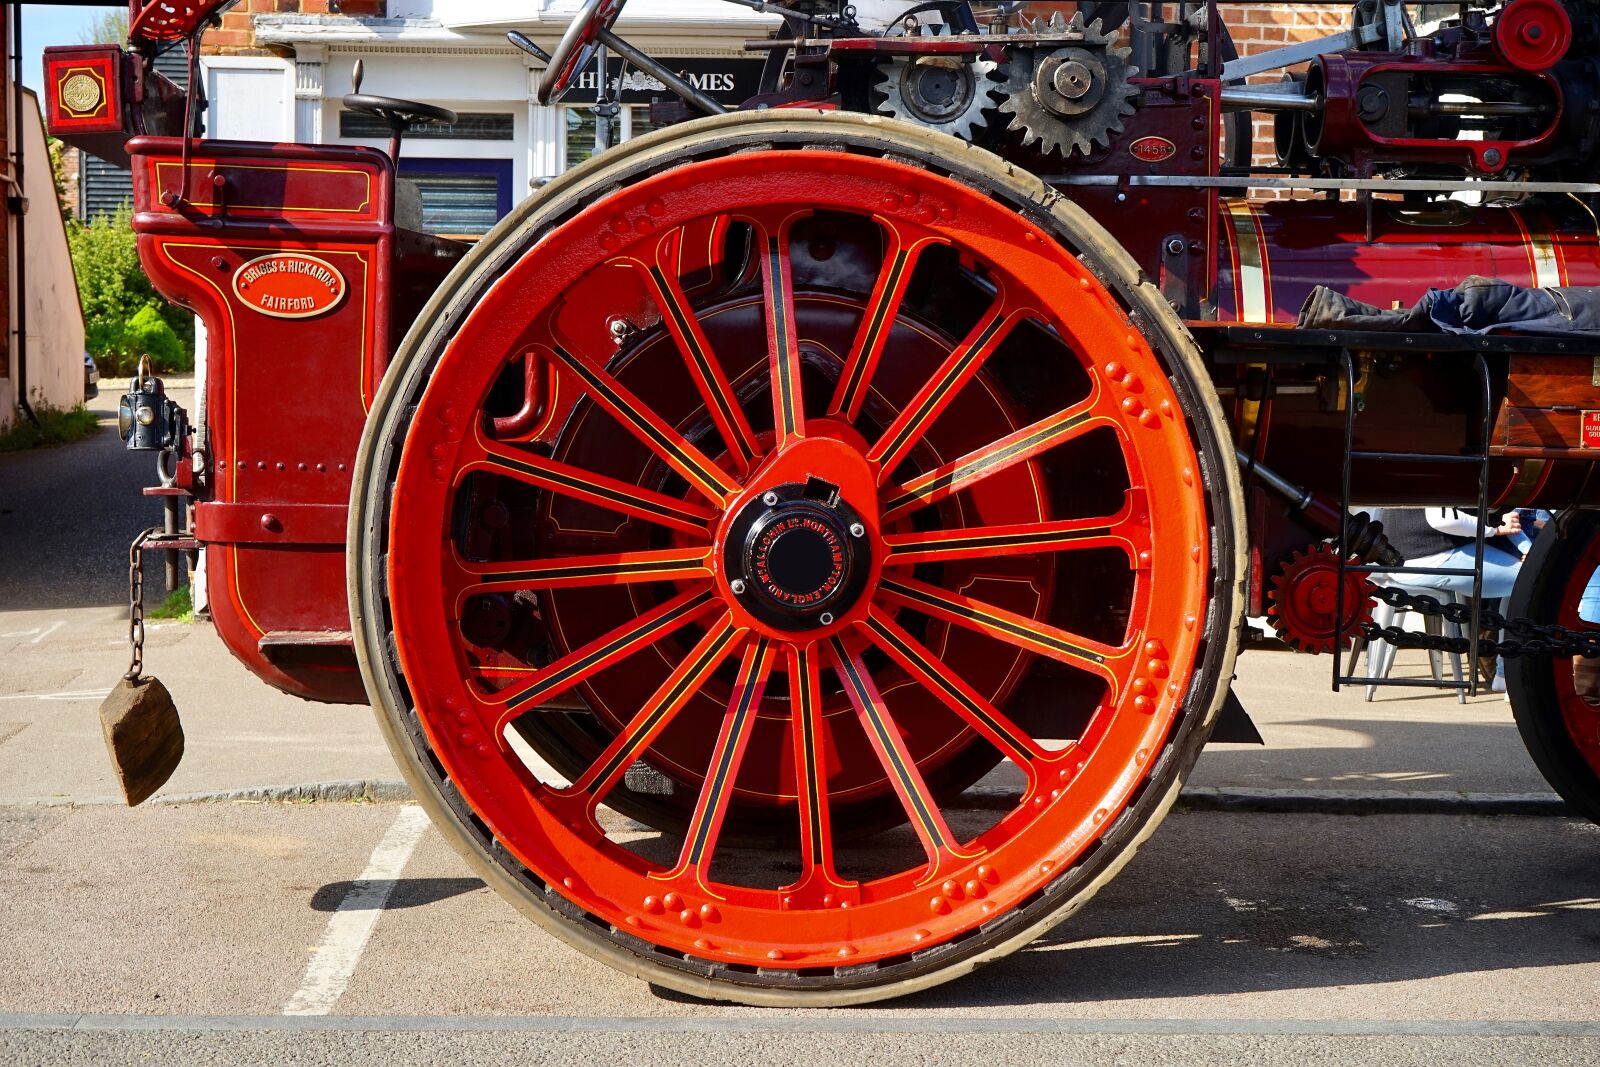 Sony a7 sample photo. Traction engine, wheel, engine photography